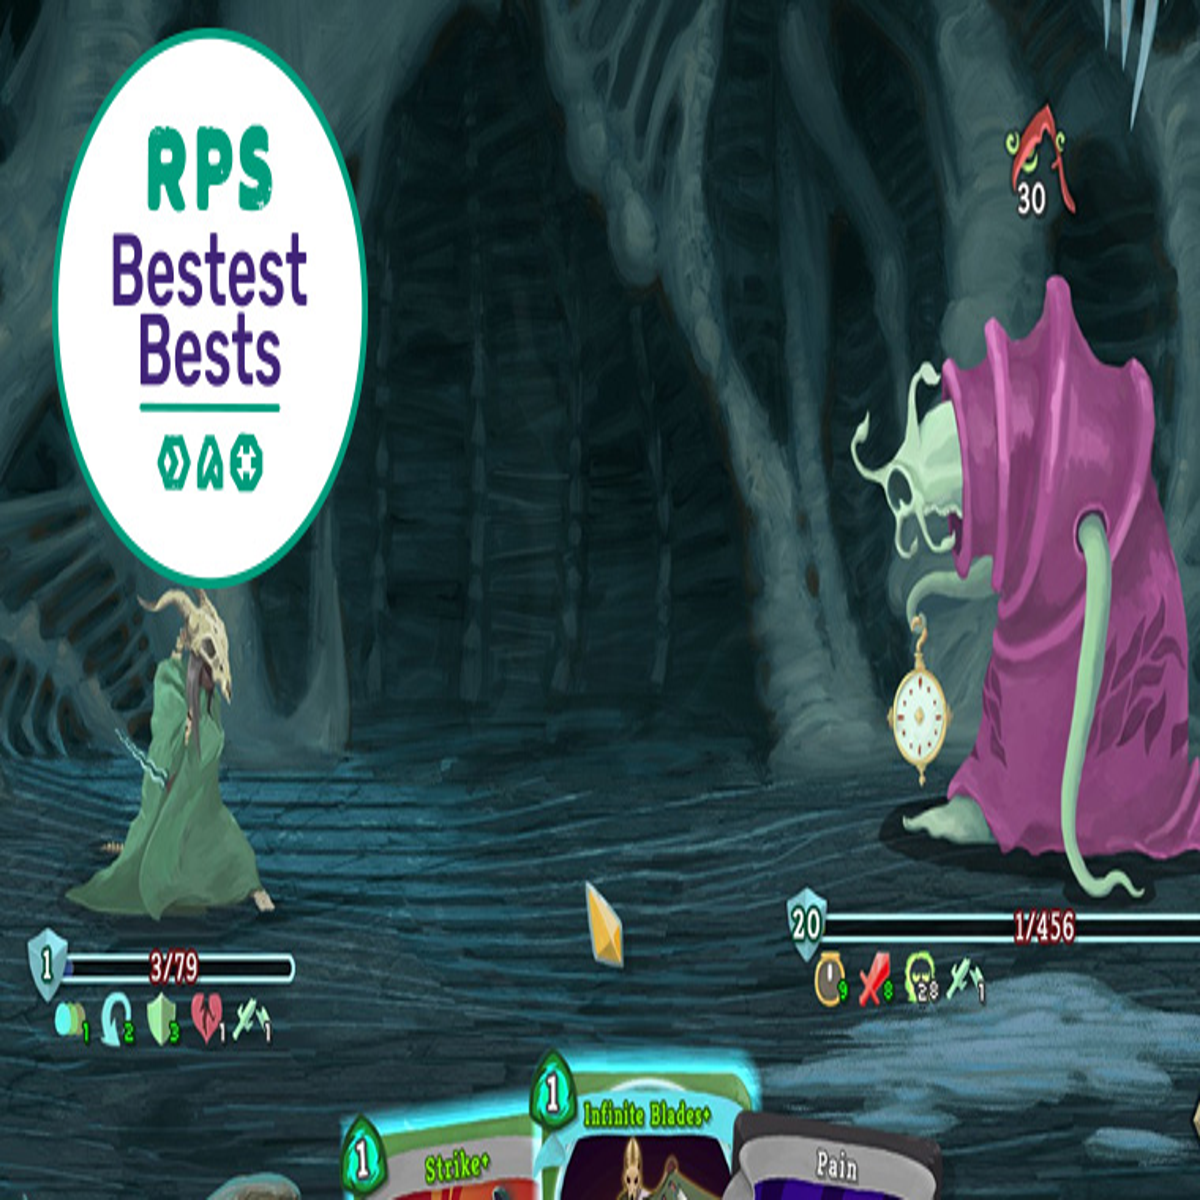 https://assetsio.gnwcdn.com/slay-the-spire-review.jpg?width=1200&height=1200&fit=crop&quality=100&format=png&enable=upscale&auto=webp